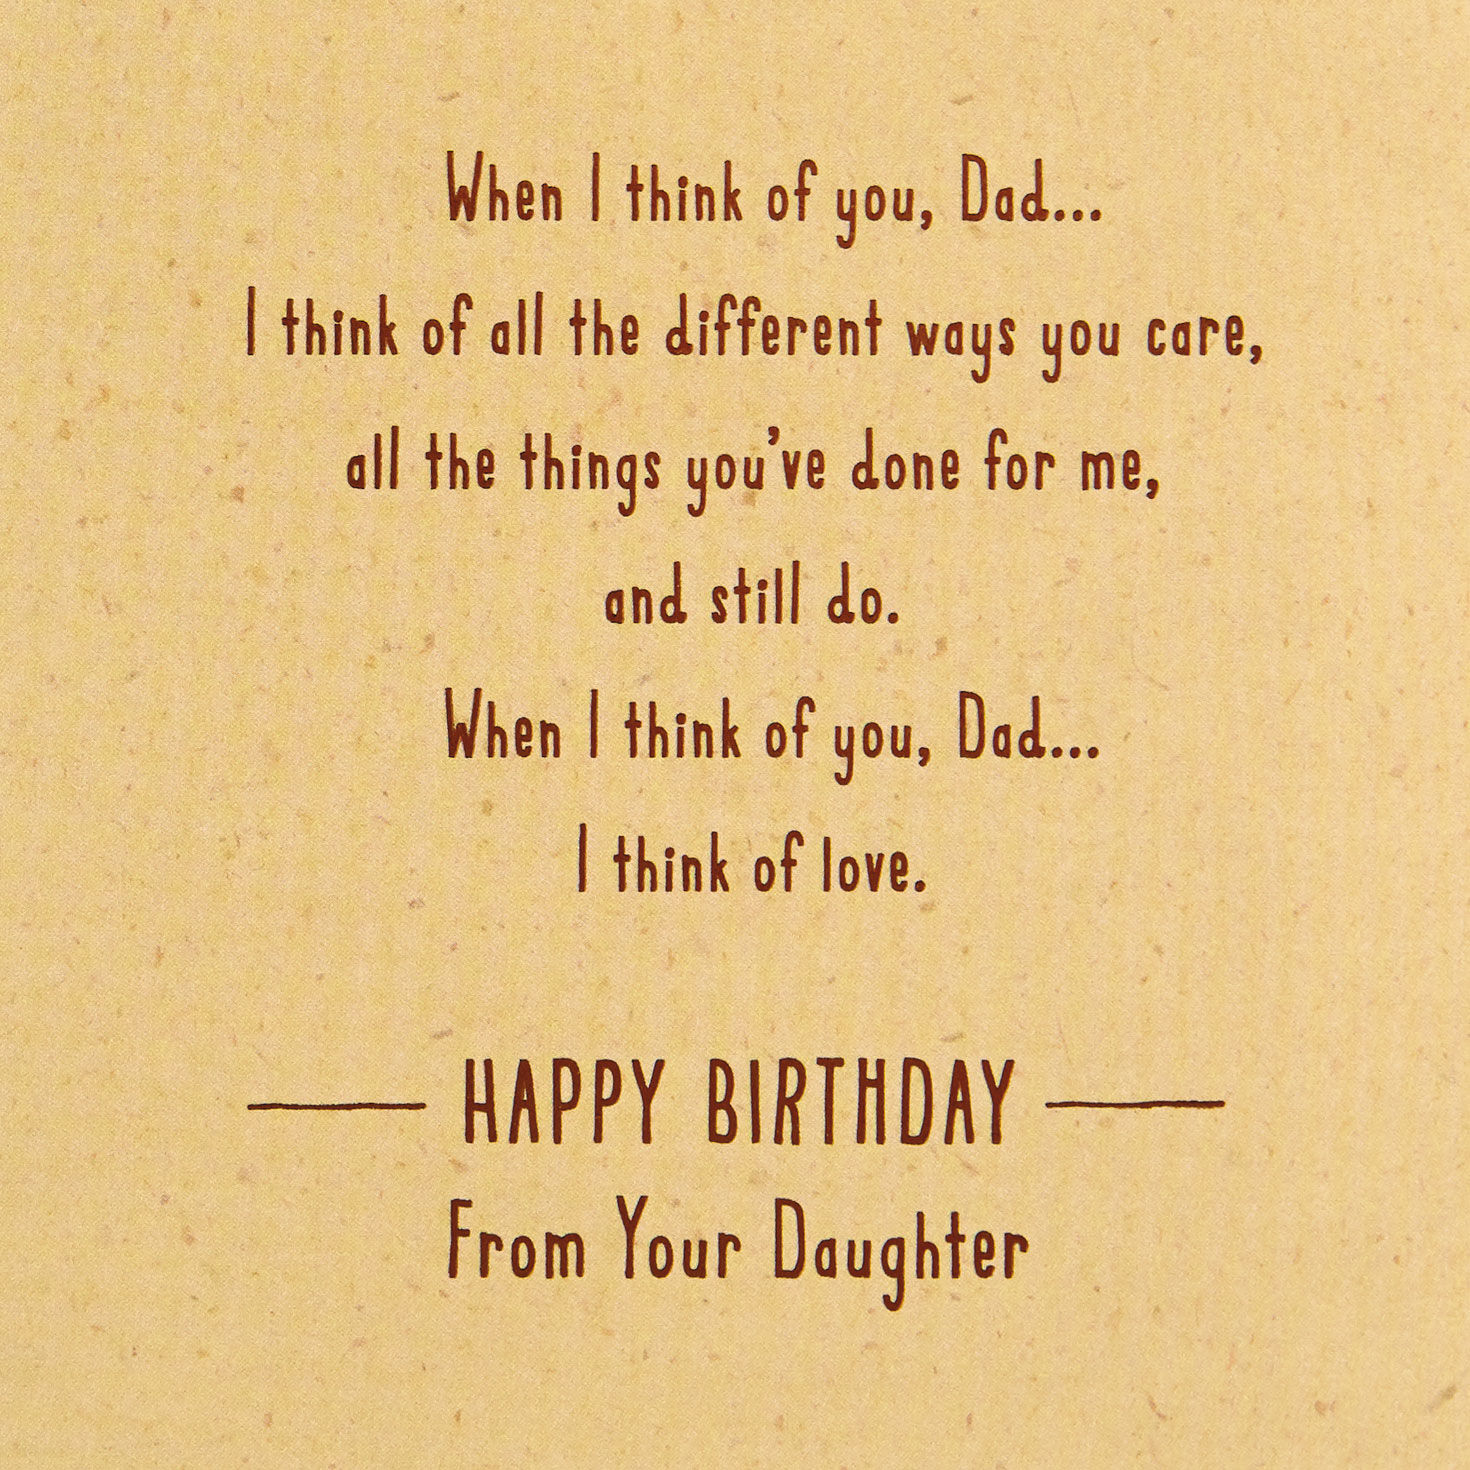 birthday greetings for dad from daughter